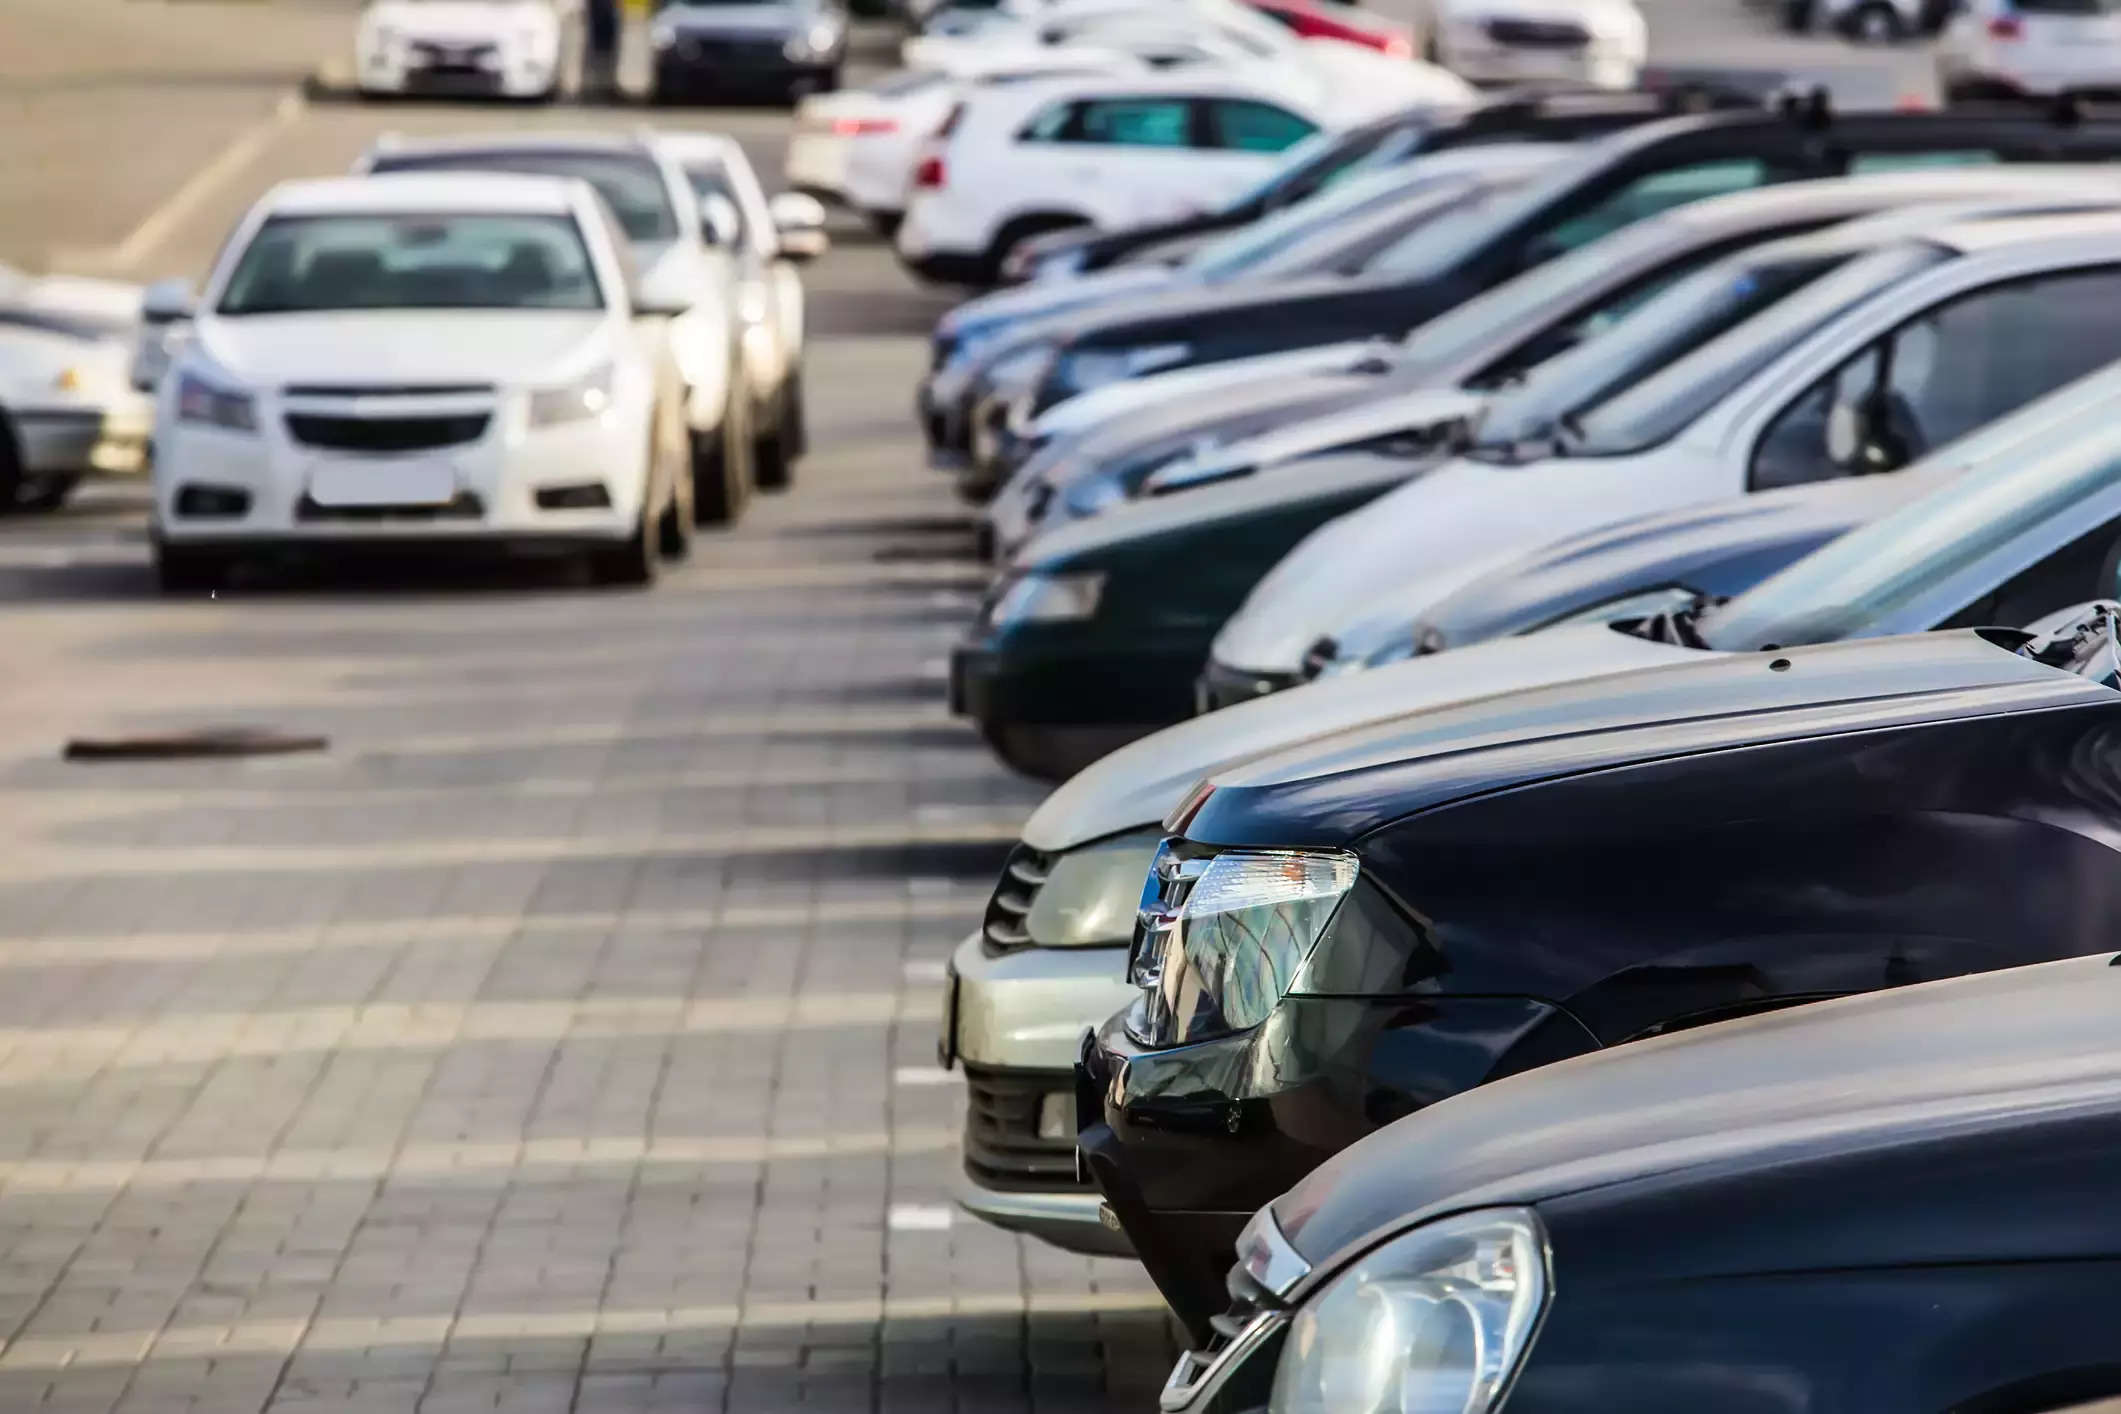  U.S. retail sales of new vehicles in April could fall 23.8% to 1.1 million units from a year earlier, according to a report released by the consultants on Wednesday.